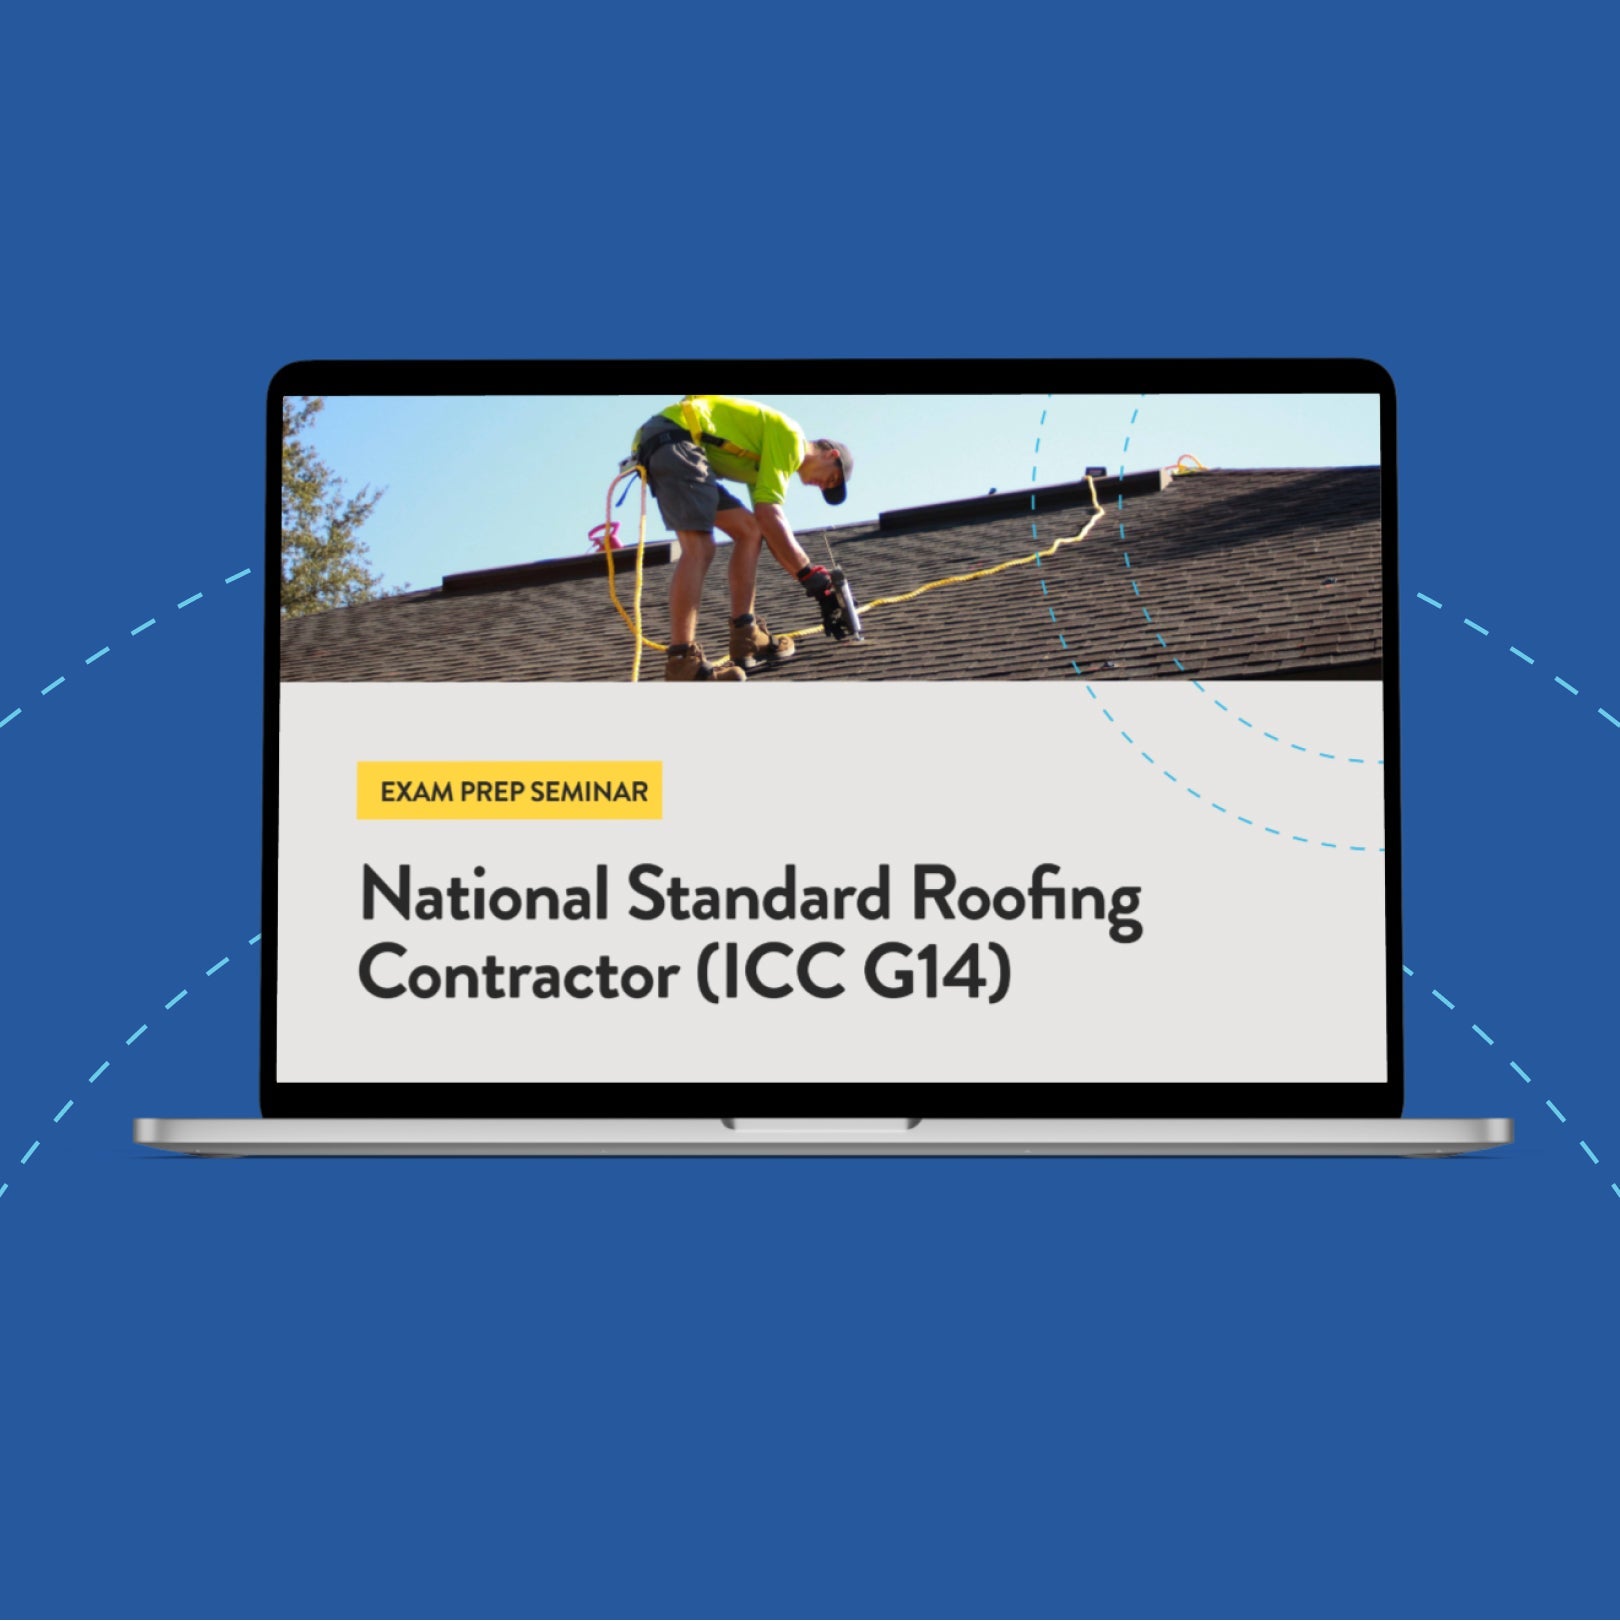 National Standard Roofing Contractor (ICC G14) Exam Prep Course